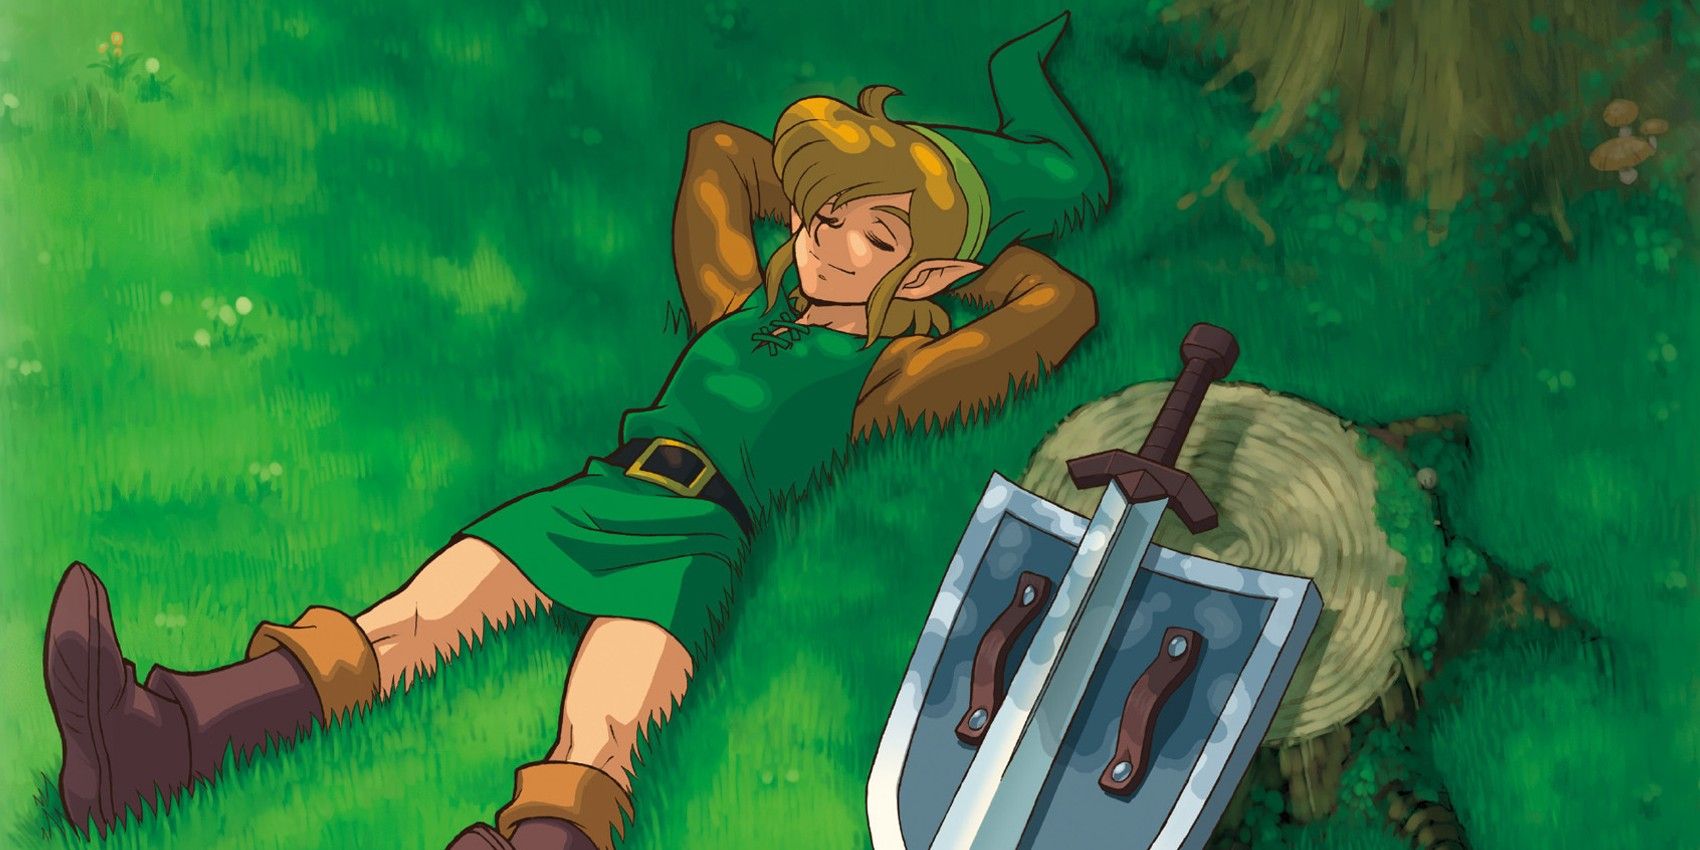 Art of Link sleeping under a tree from The Legend of Zelda: A Link to the Past